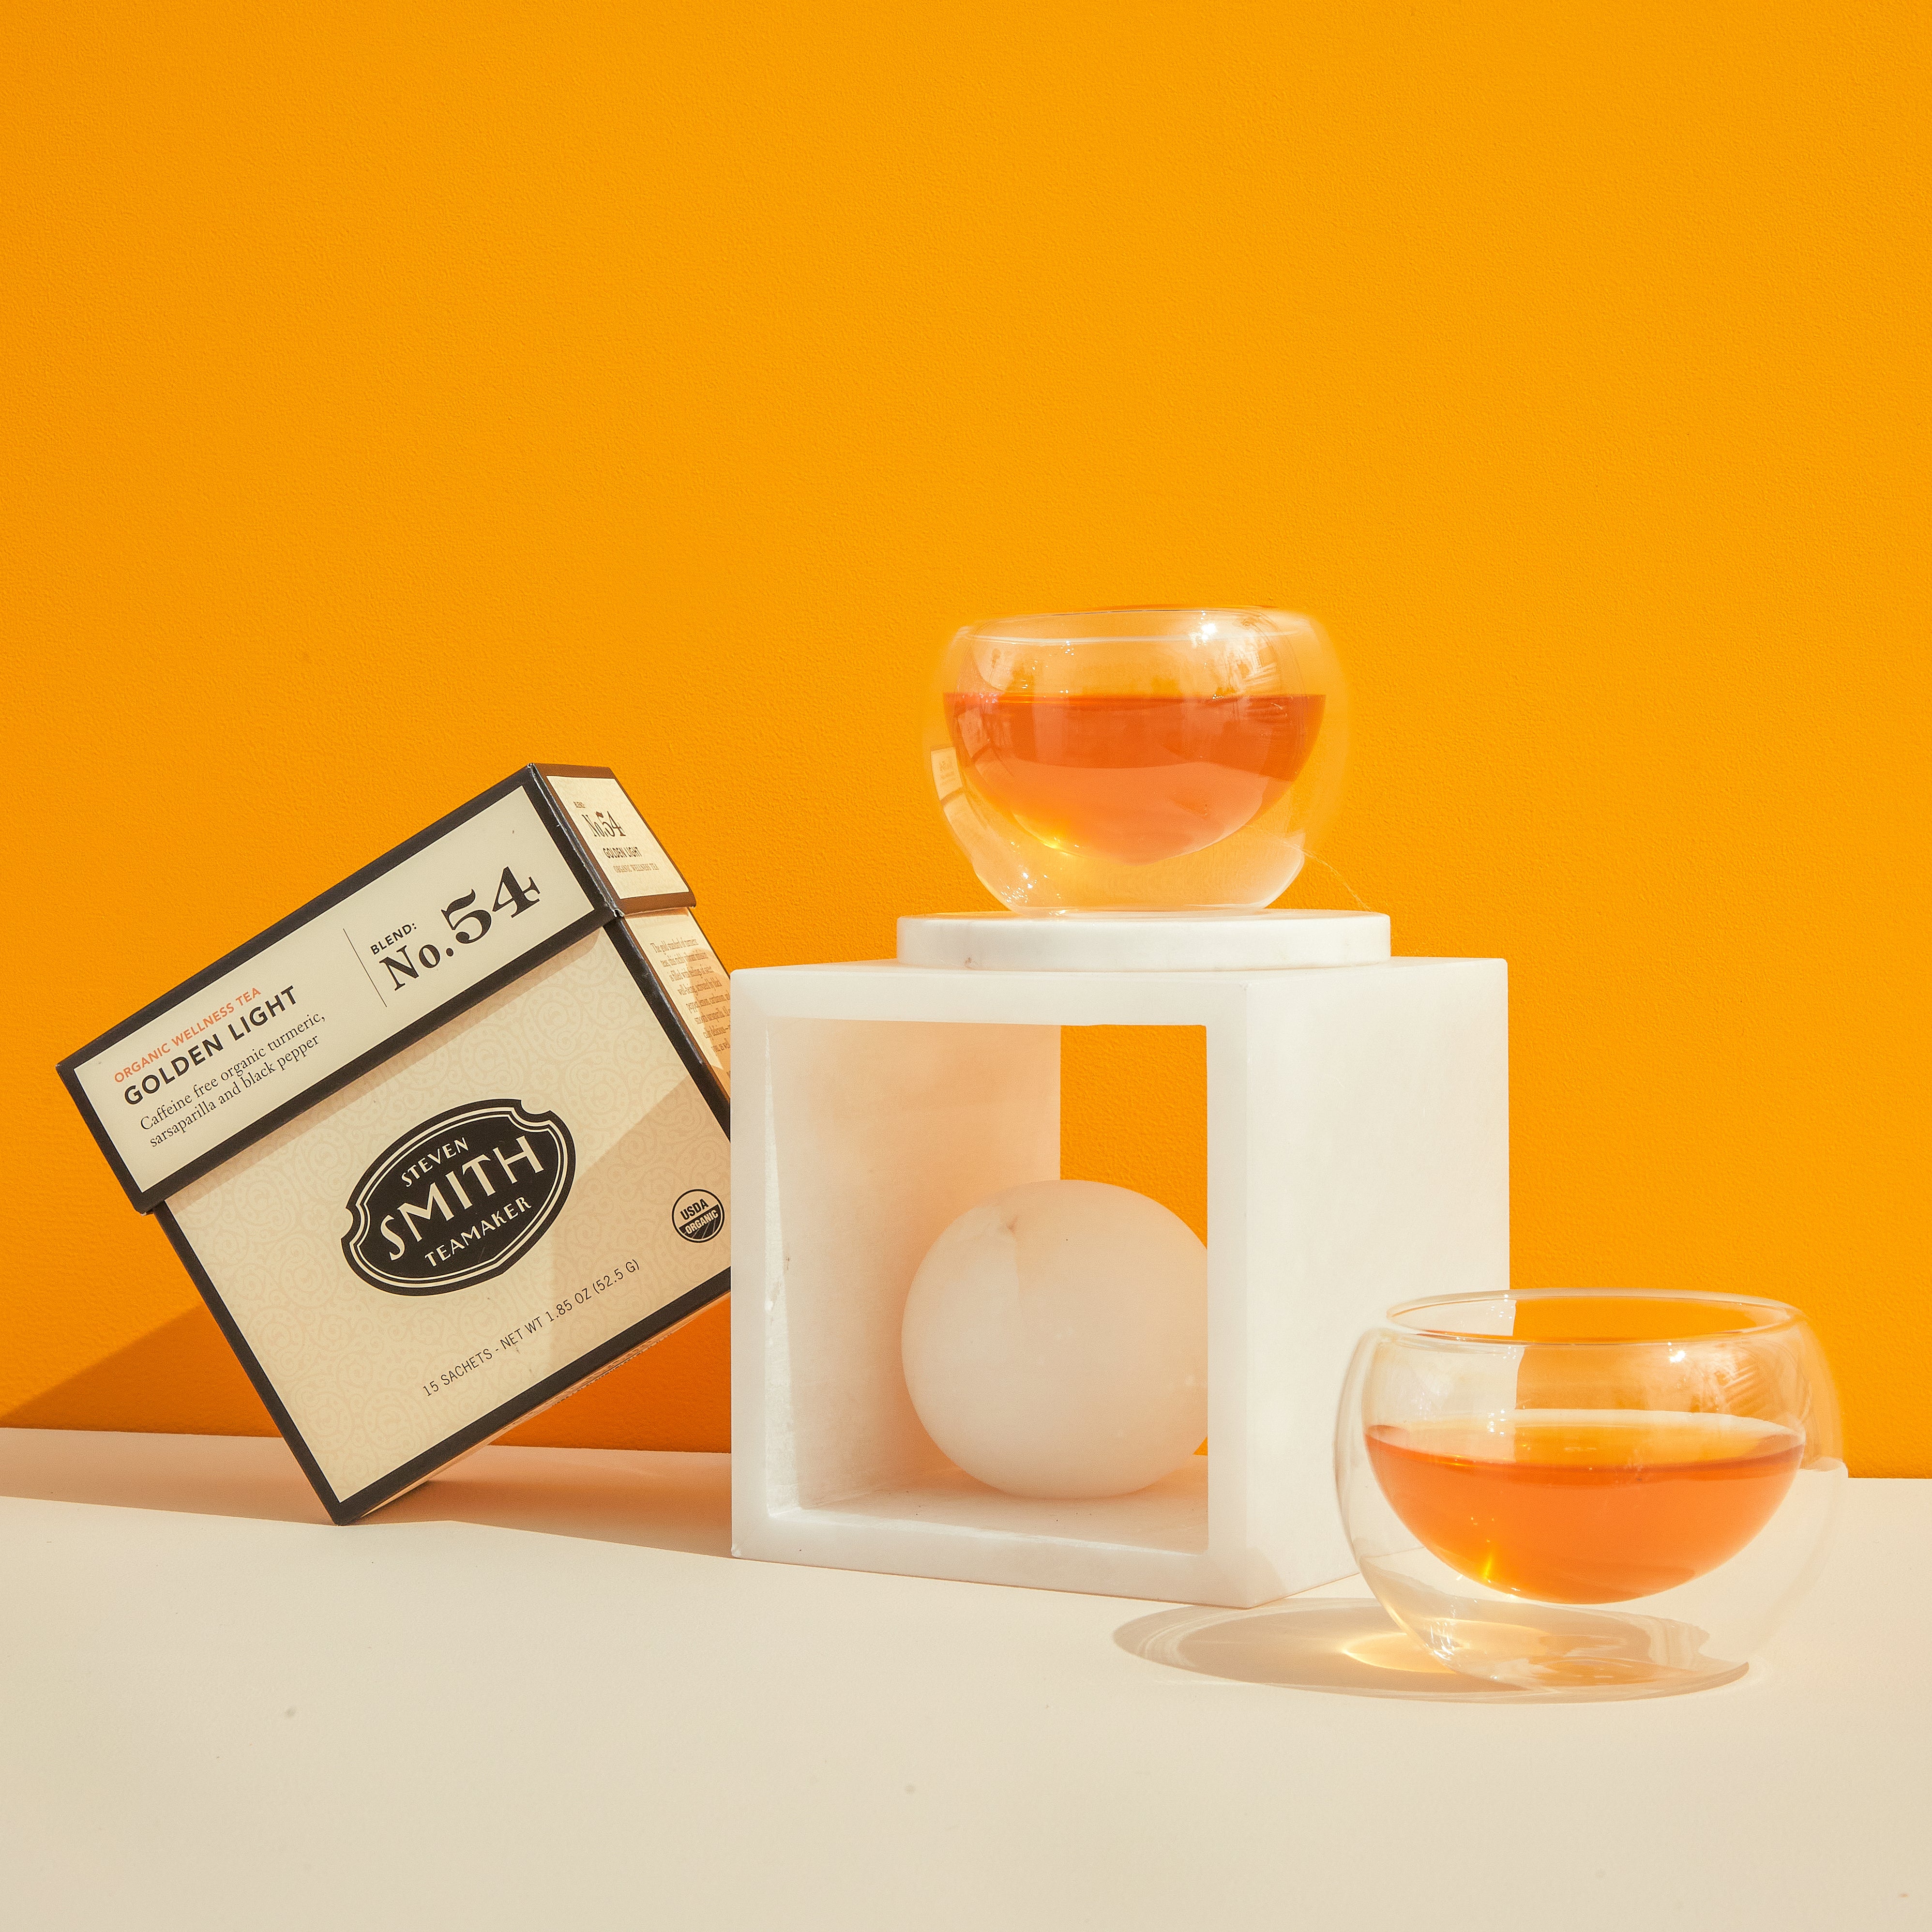 Cream box of Golden Light wellness tea next to two glass cups filled with orange tea.